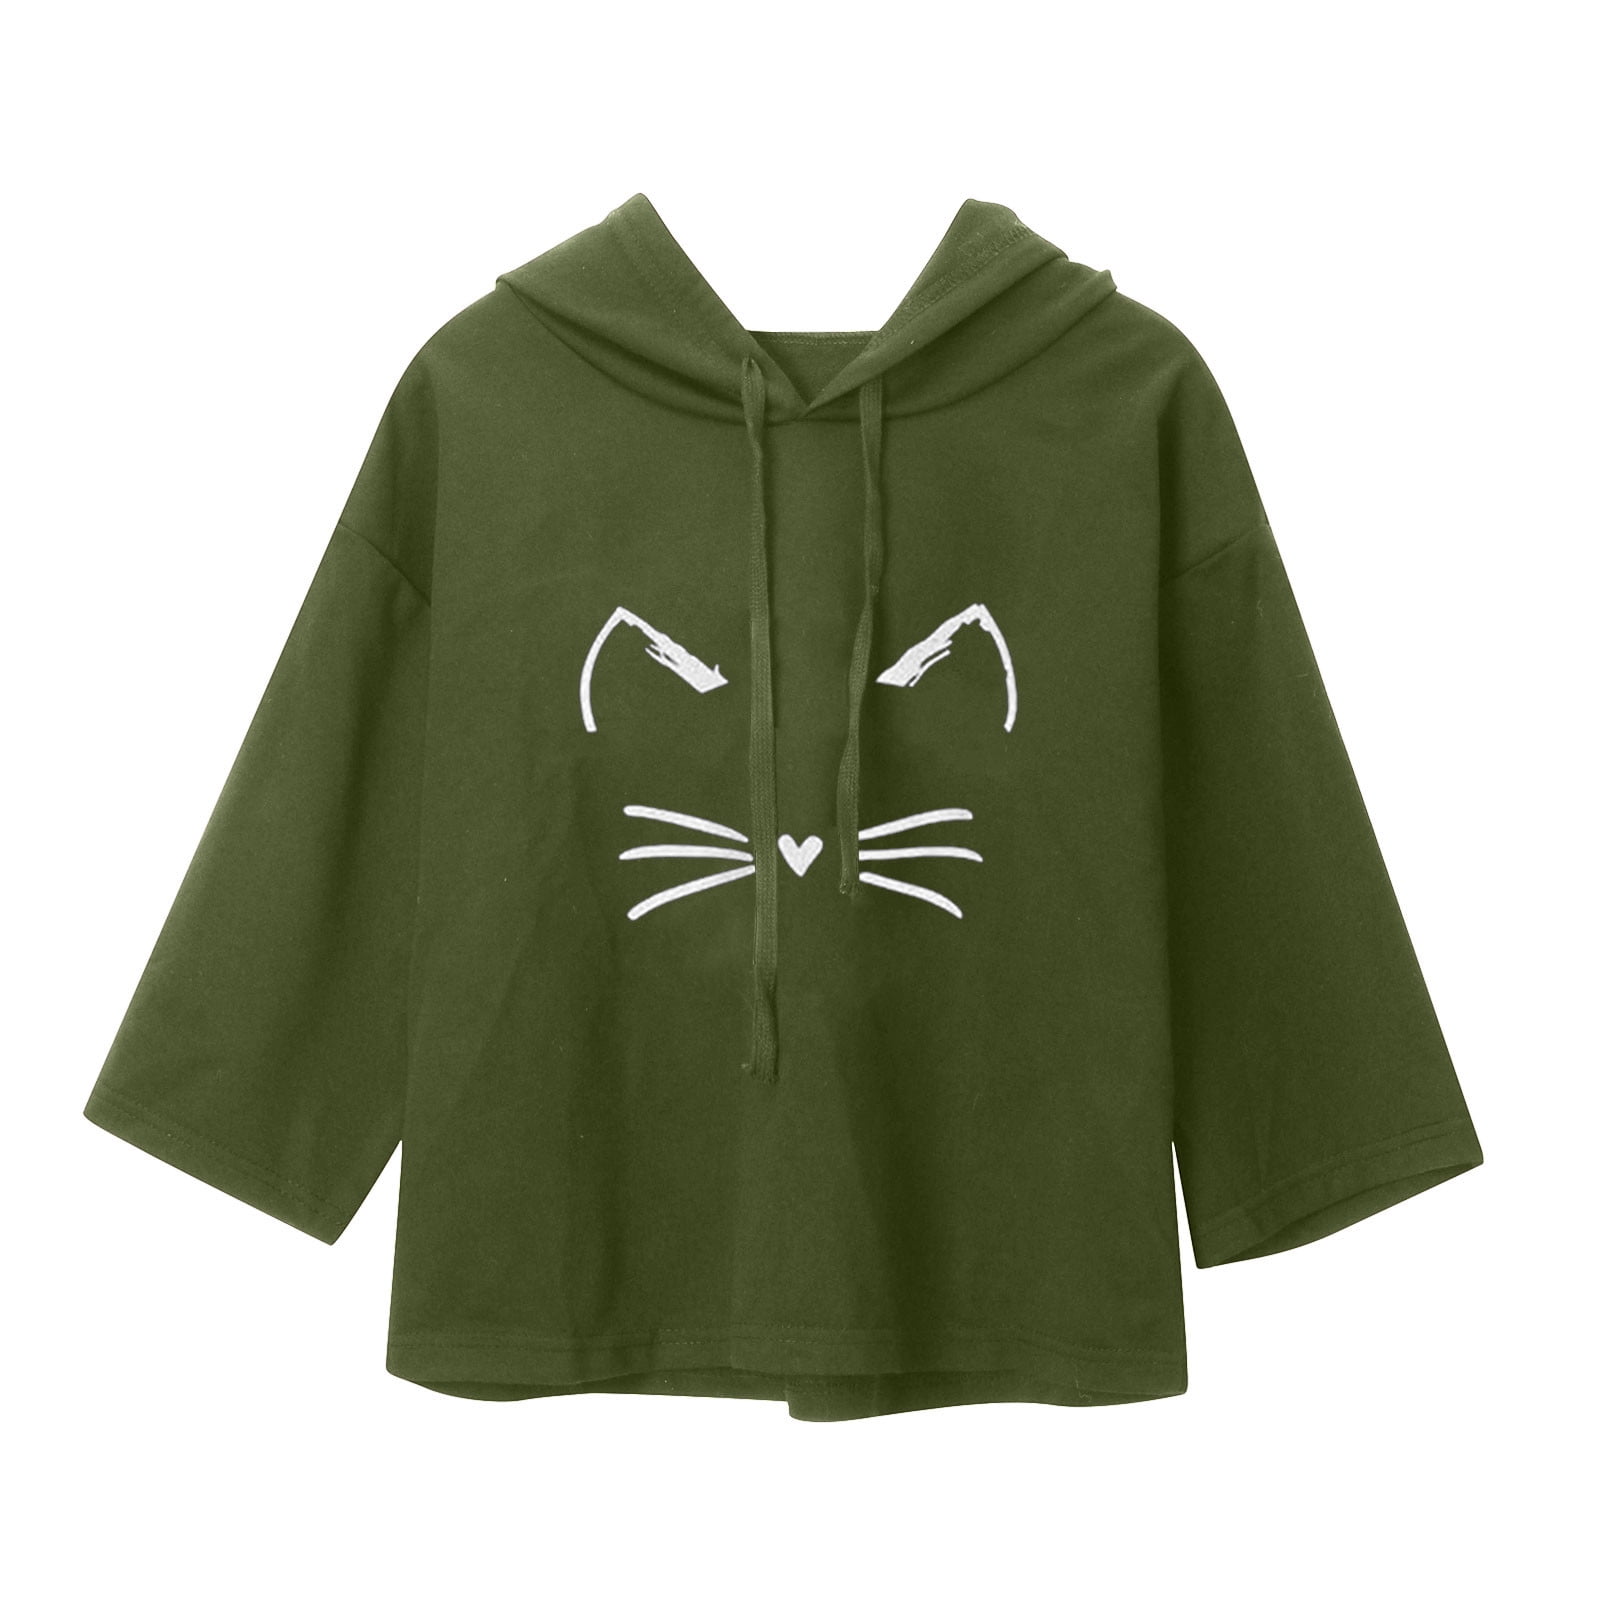 Fashion Womens Sweatshirt Cat Print Hoodie With Ears Pullover Tunic Tops Blouse 